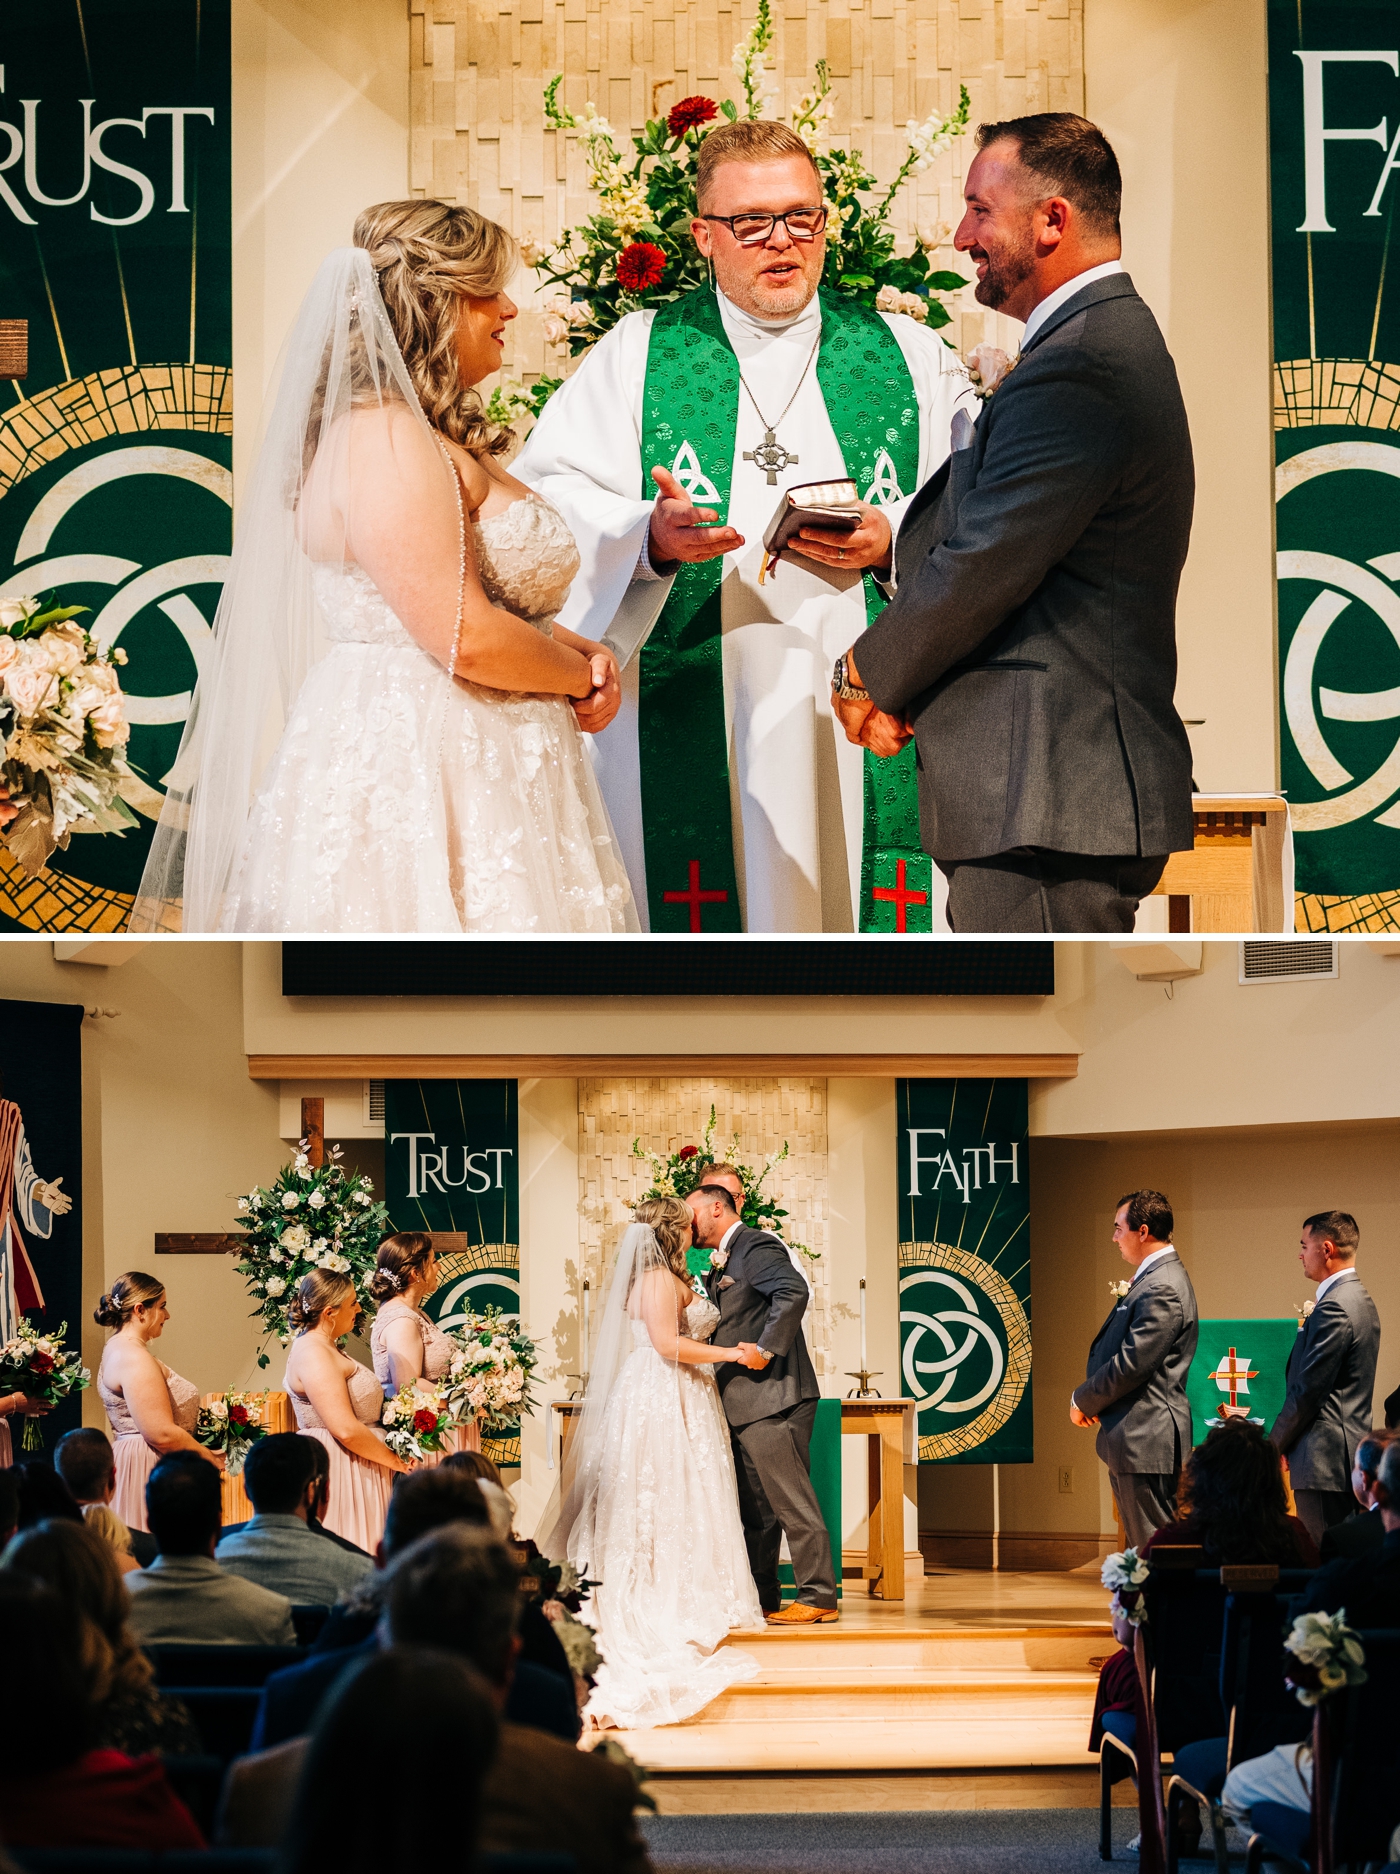 Wedding ceremony and first kiss at Mt. Olive Lutheran Church